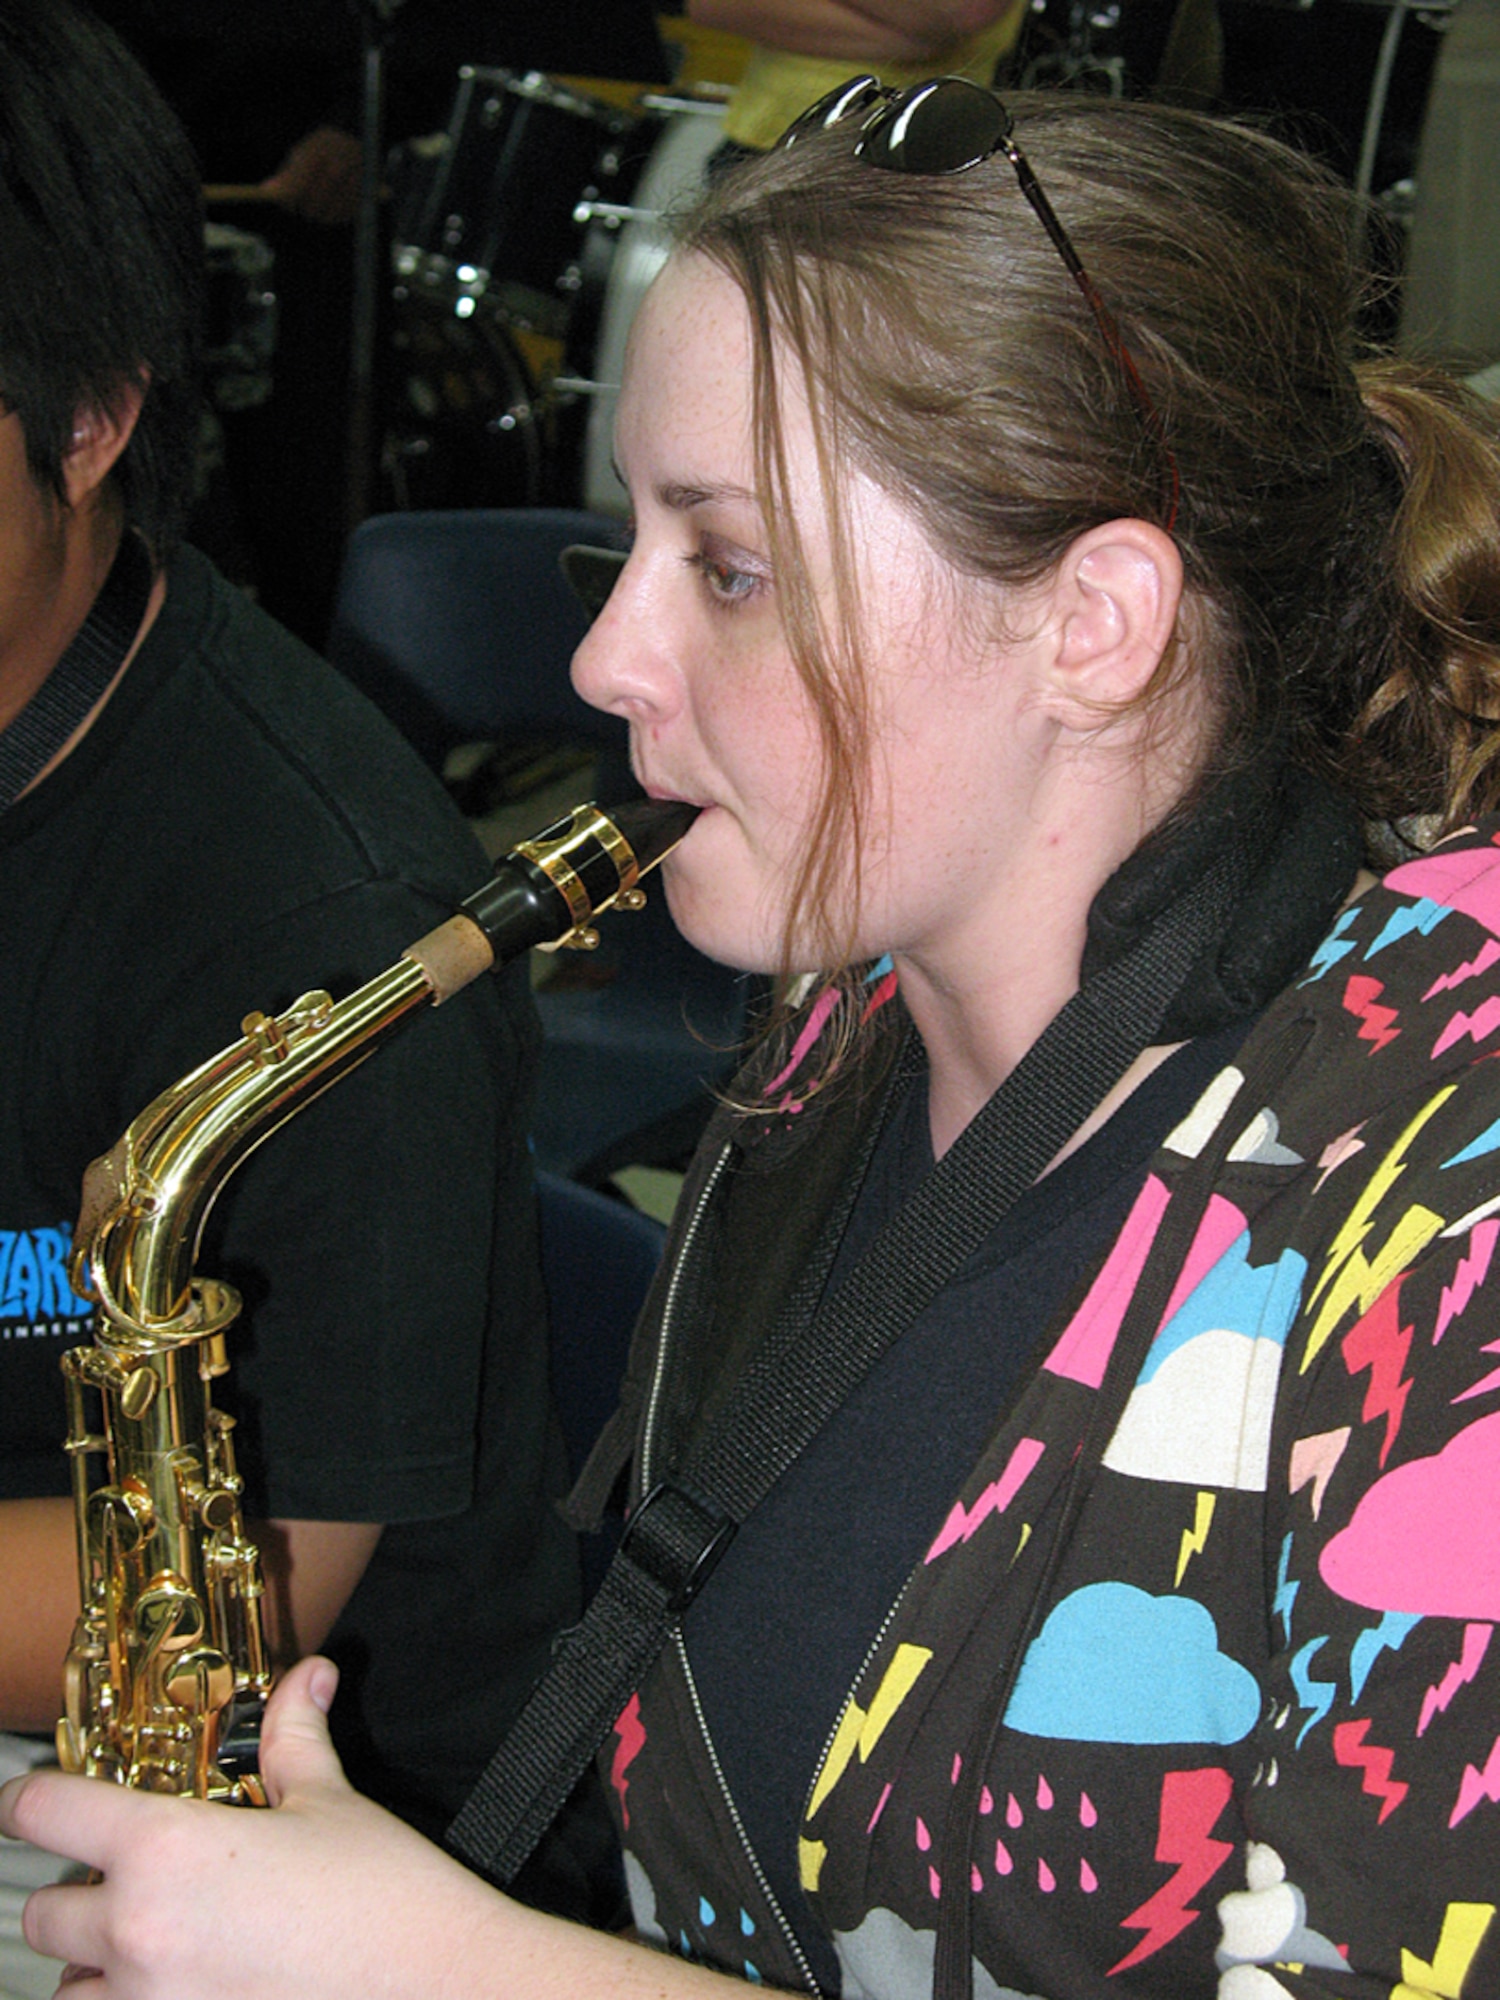 Senior Airman Rebecca Cook, a boundary protection specialist with the 36th Comunications Squadron plays the 1st Alto Saxophone with the Guam Territorial Band Mar. 20 during a scheduled practice session. SrA Cook has been playing the 1st Alto Saxophone since the age of eight.  (U.S. Air Force photo by Airman 1st Class Carissa Wolff)